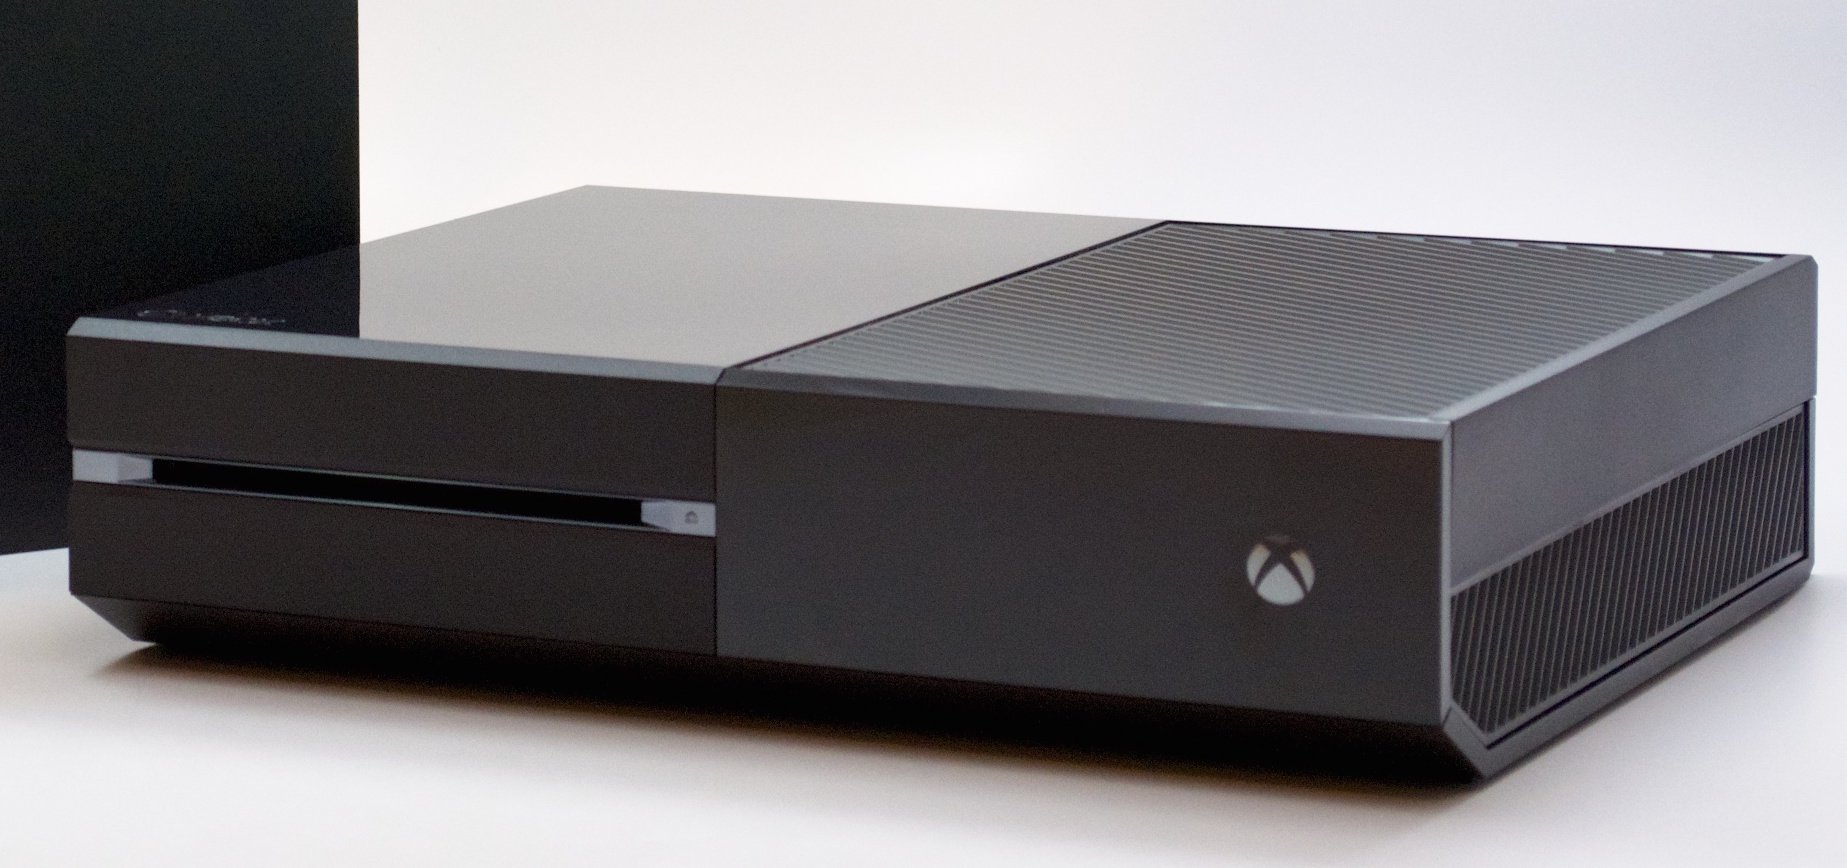 Use this Xbox trade in deal to score a huge discount on a new Xbox One.